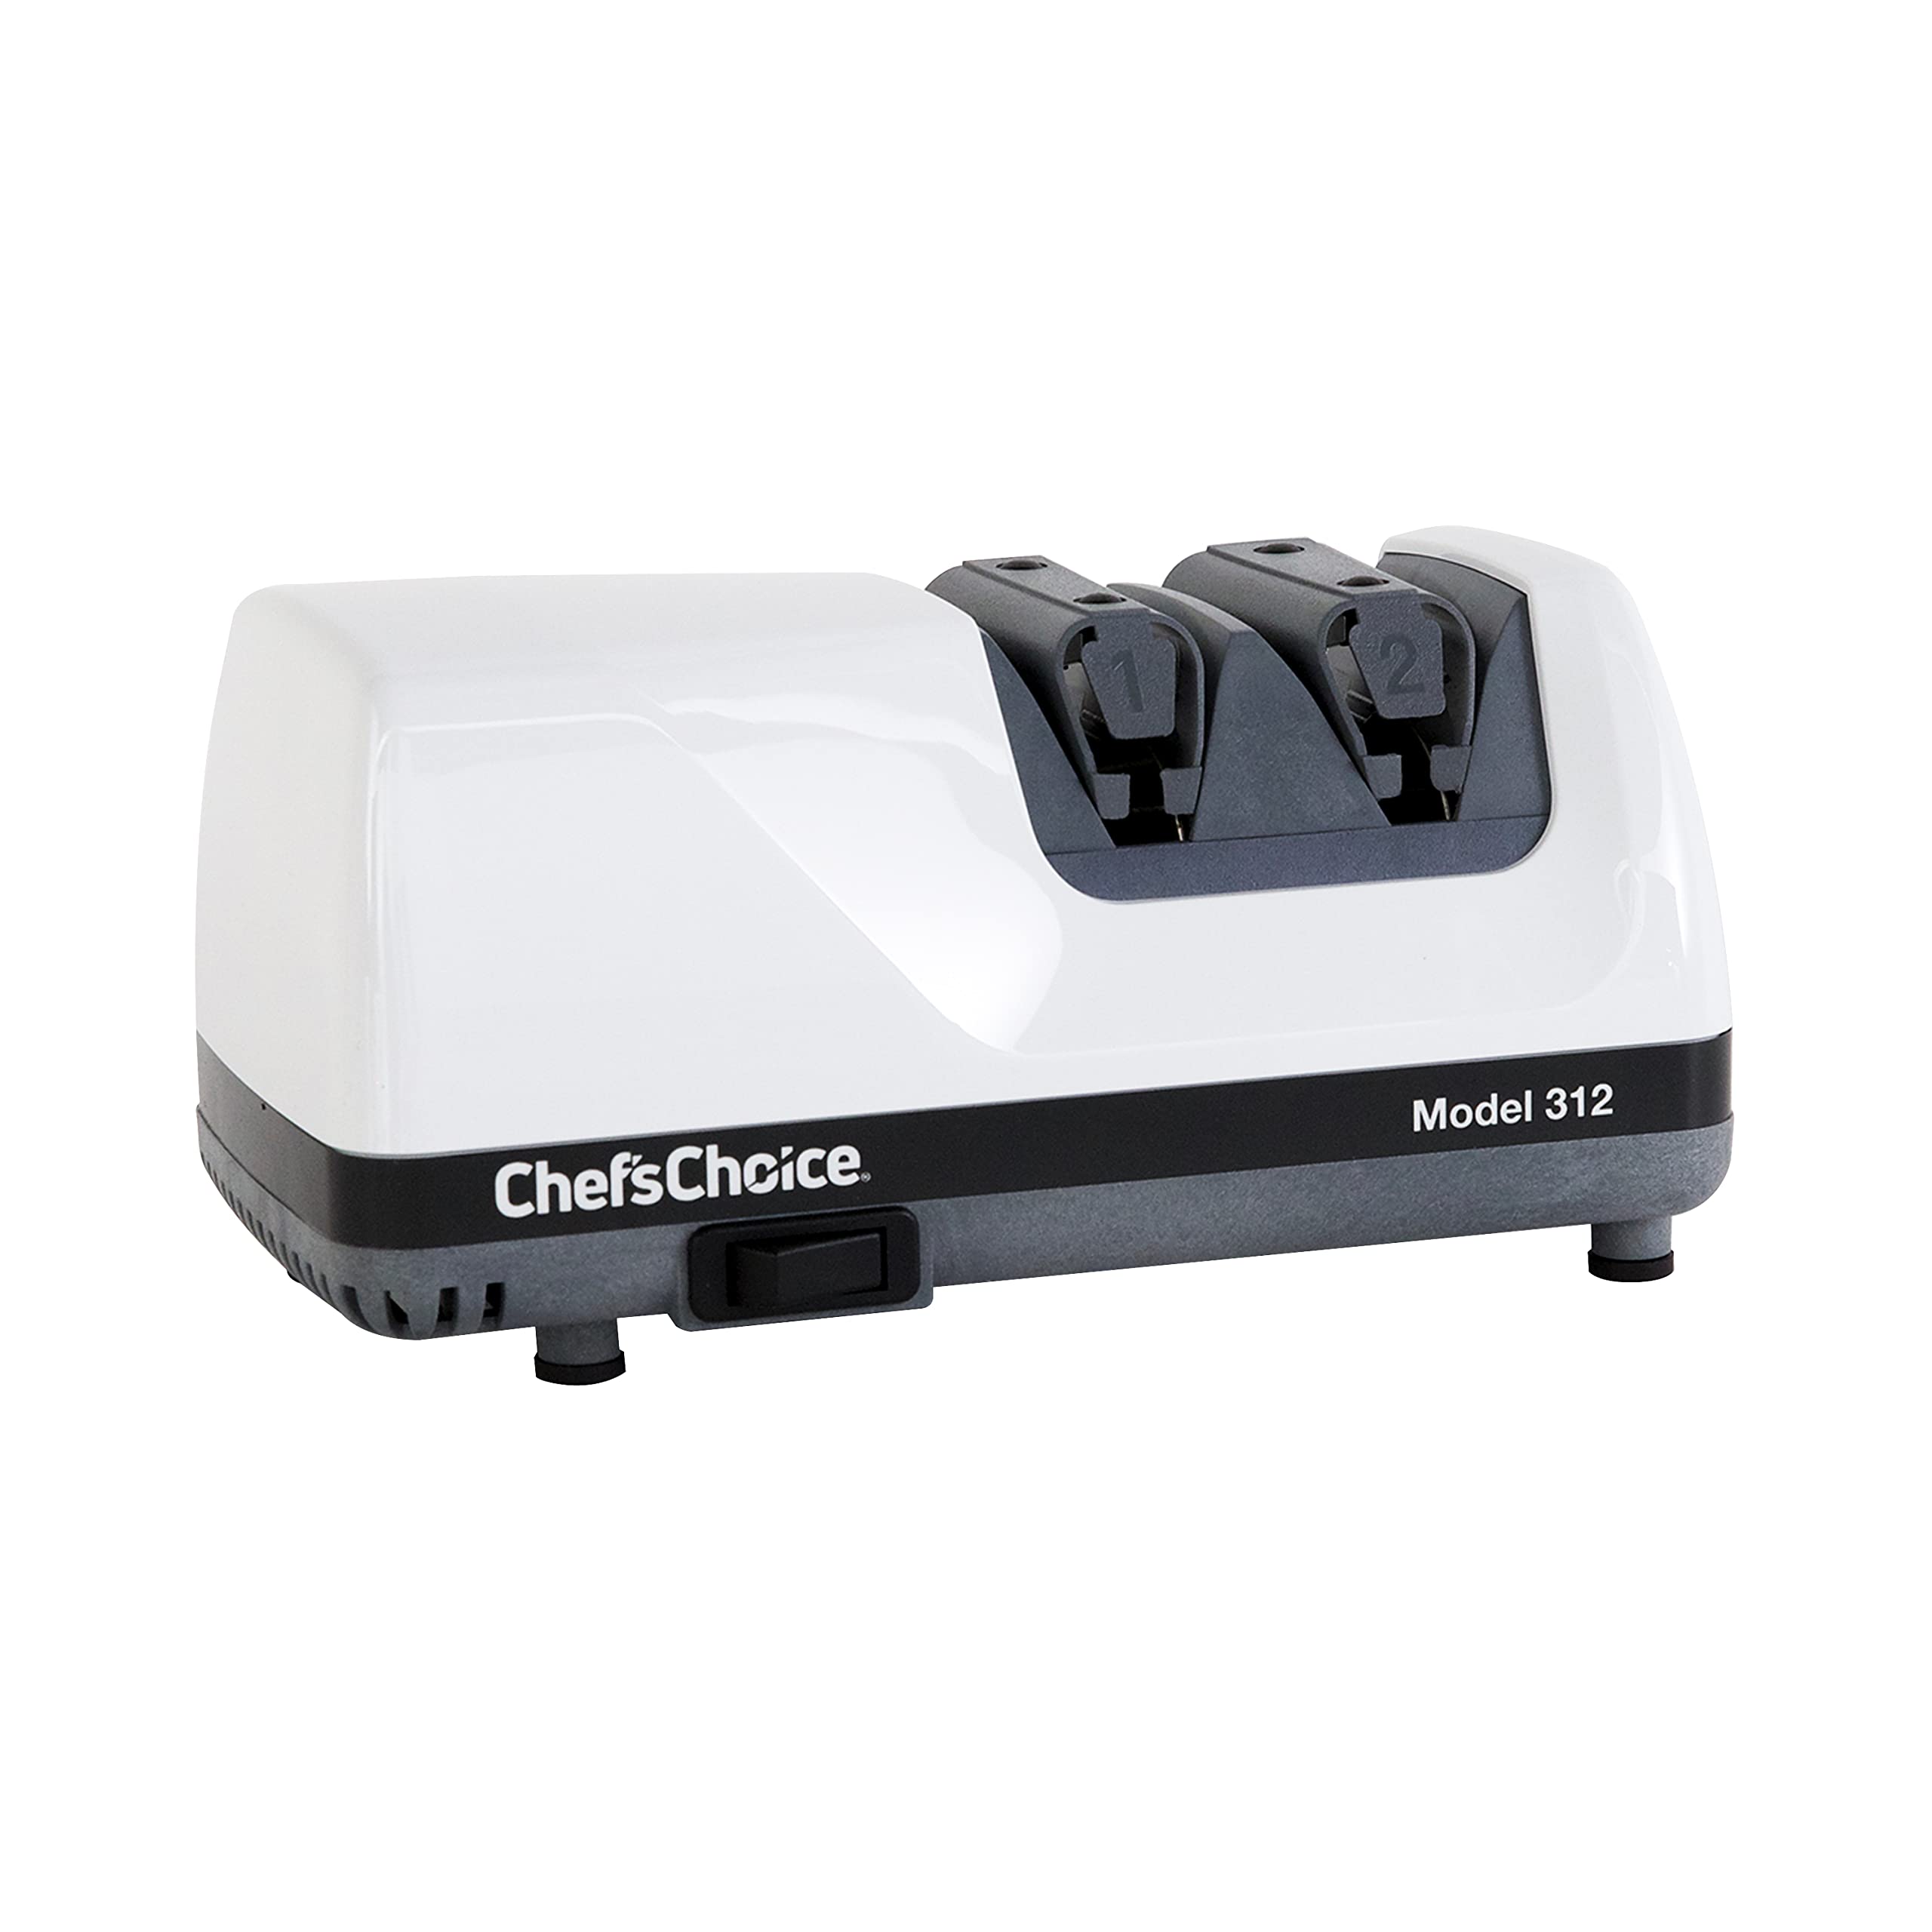 Chef'sChoice 312 UltraHone Professional Electric 2-Stage Knife Sharpener (White) $42.80 + Free Shipping